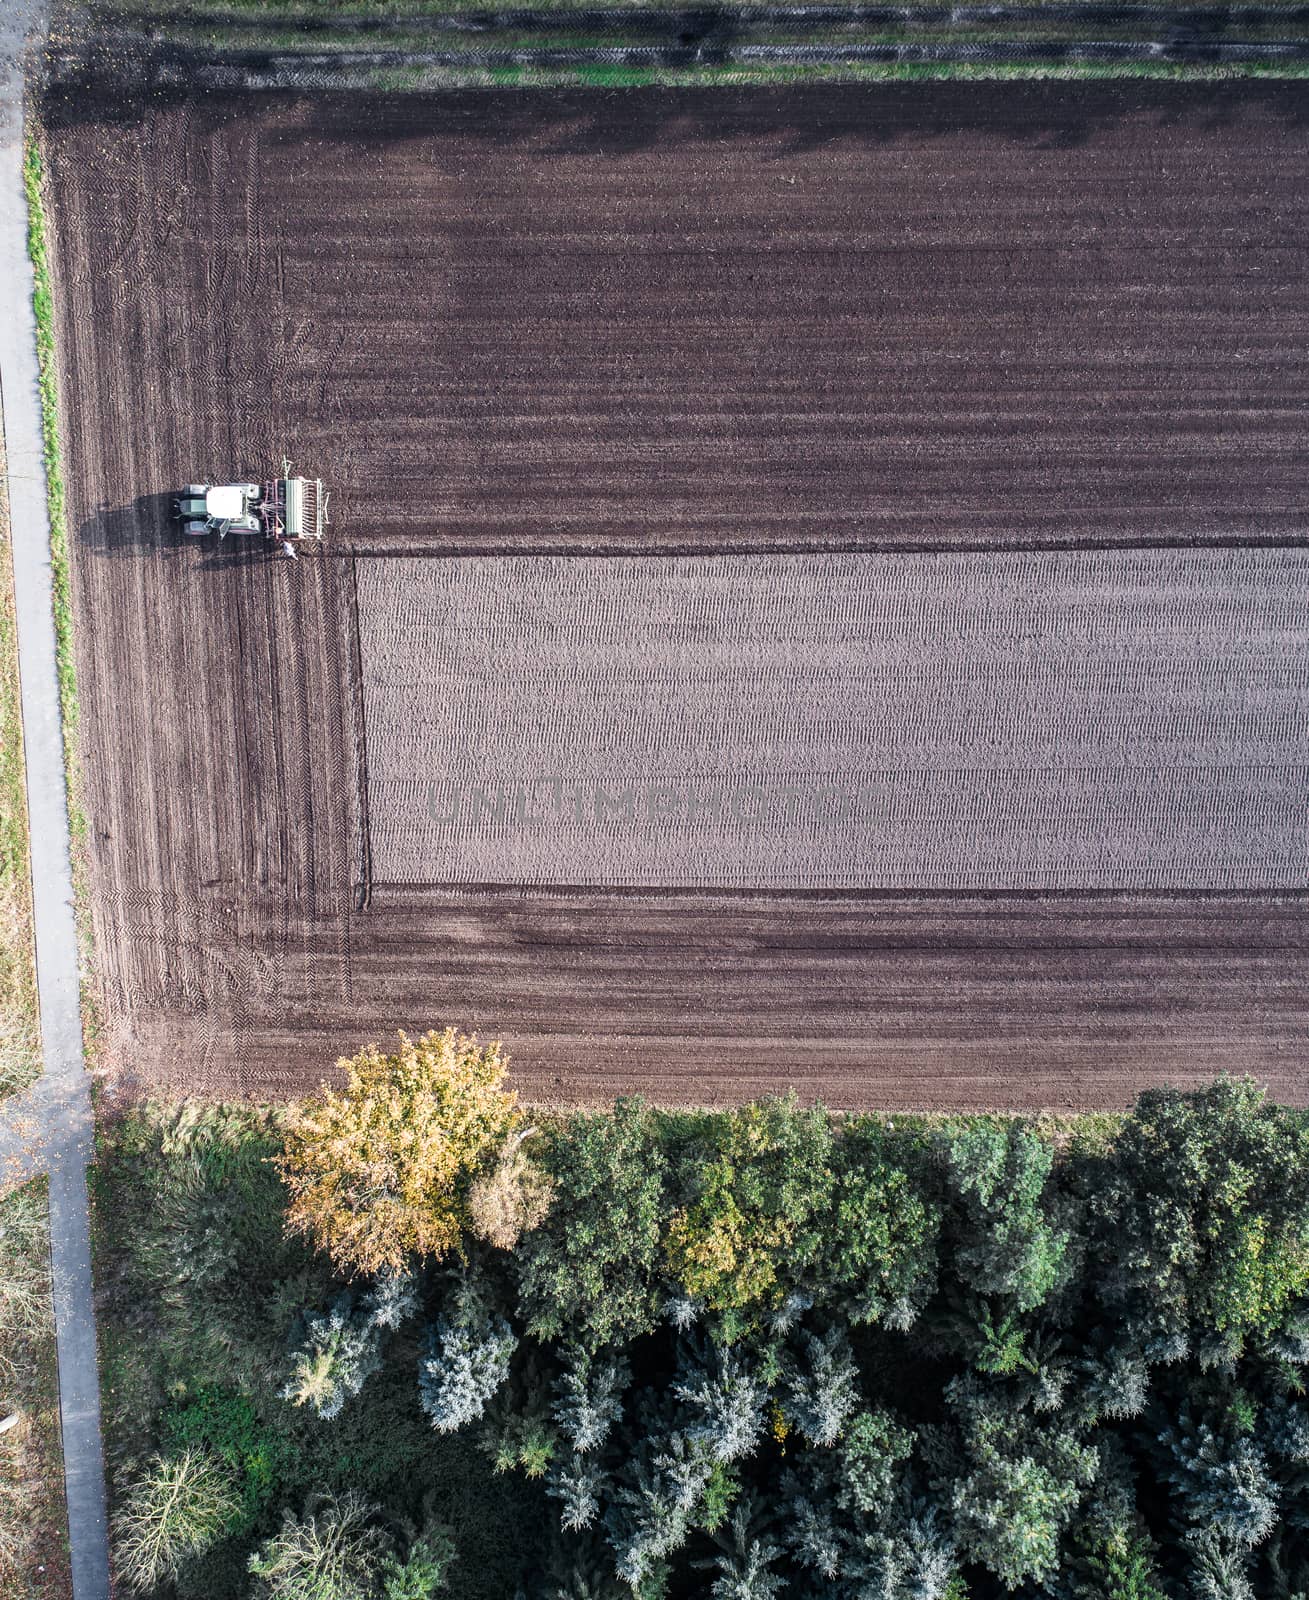 Farmer ploughs rectangular geometric pattern into his field, aer by geogif